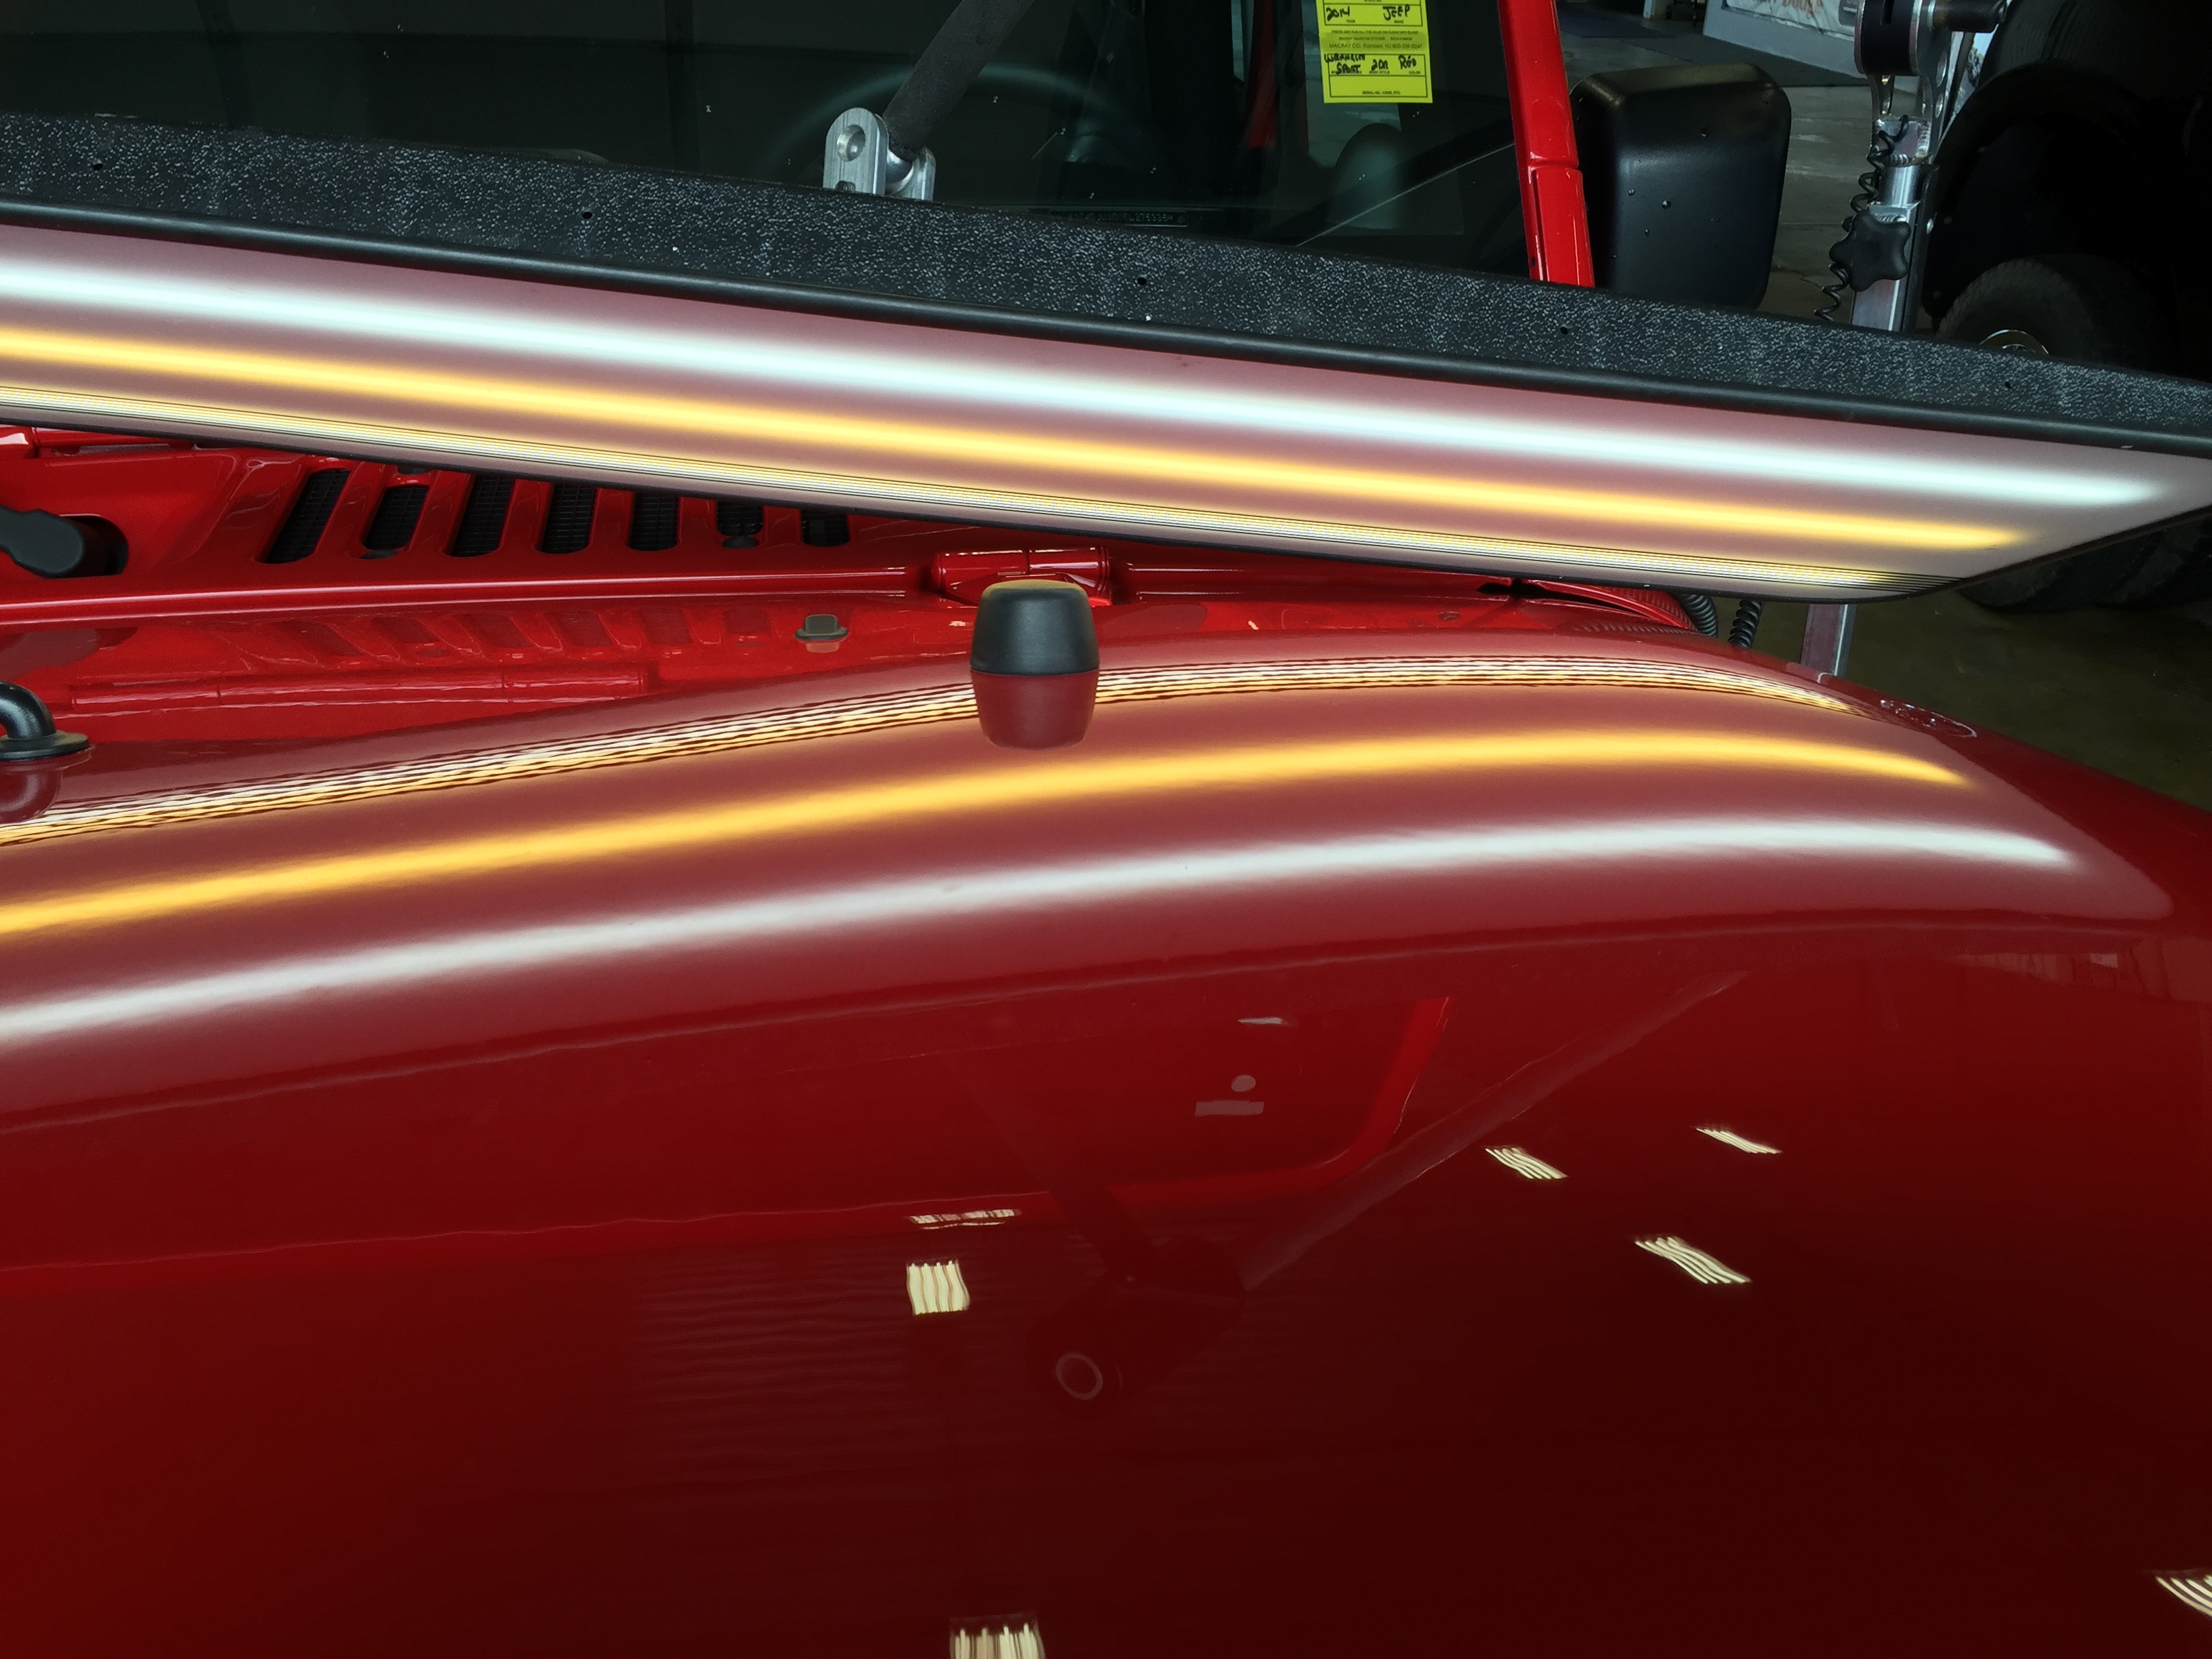 2014 Jeep Wrangler Dent Removal, Hail Damage on Hood. Springfield, IL. Paintless Dent Removal by Michael Bocek with http://217dent.com